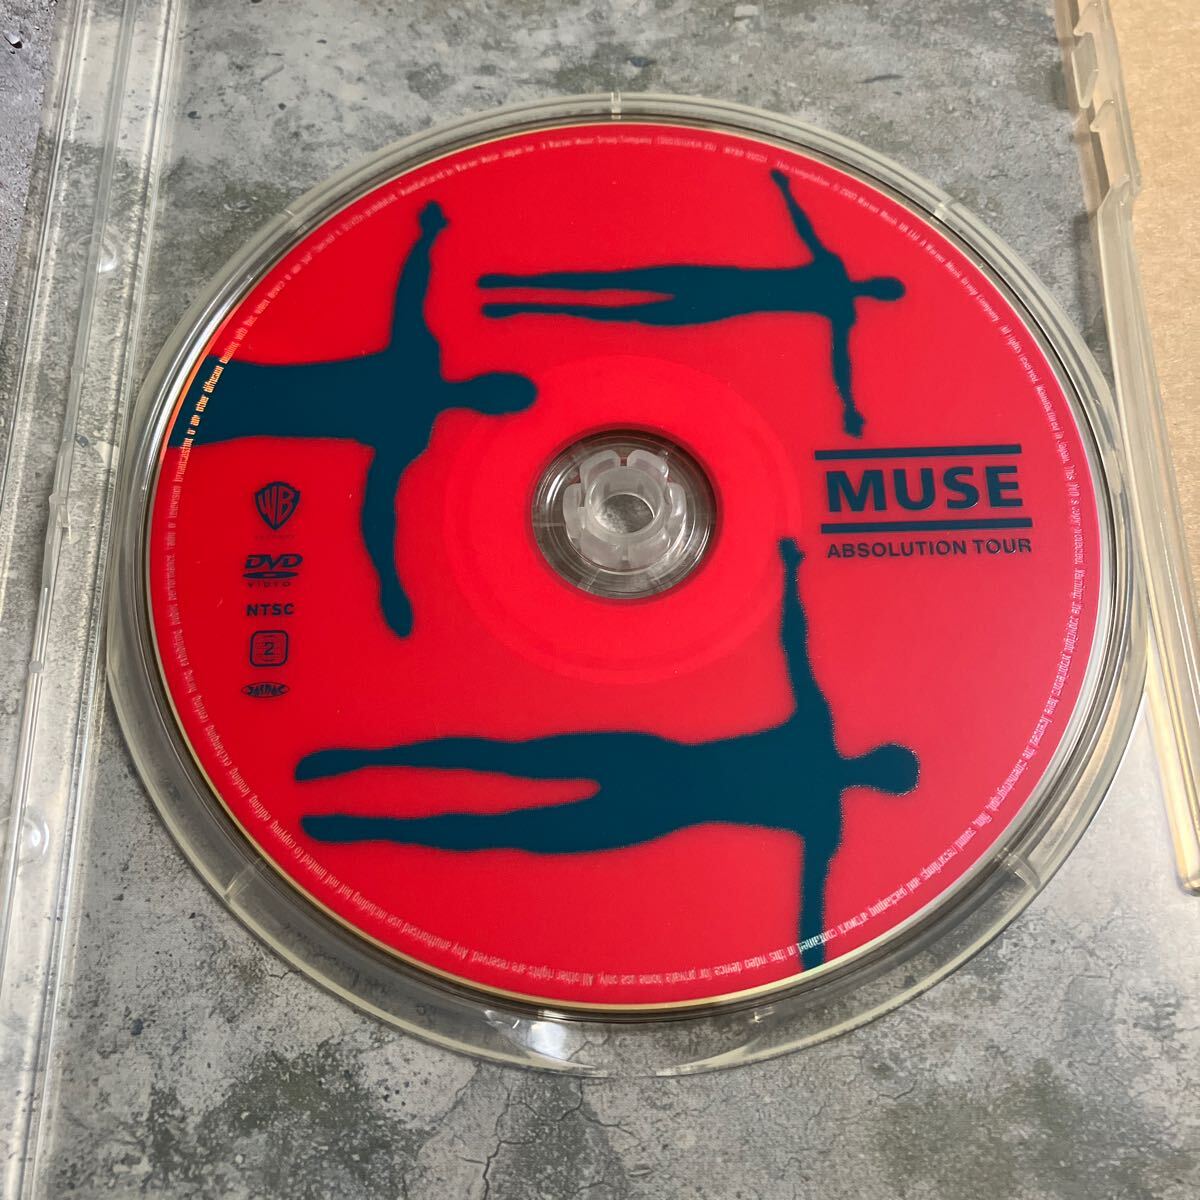 DVD MUSE ミューズ / ライヴ・フロム・アブソルーション・ツアー WPBR90551 ABSOLUTION TOUR 盤面にスリキズあり_画像3